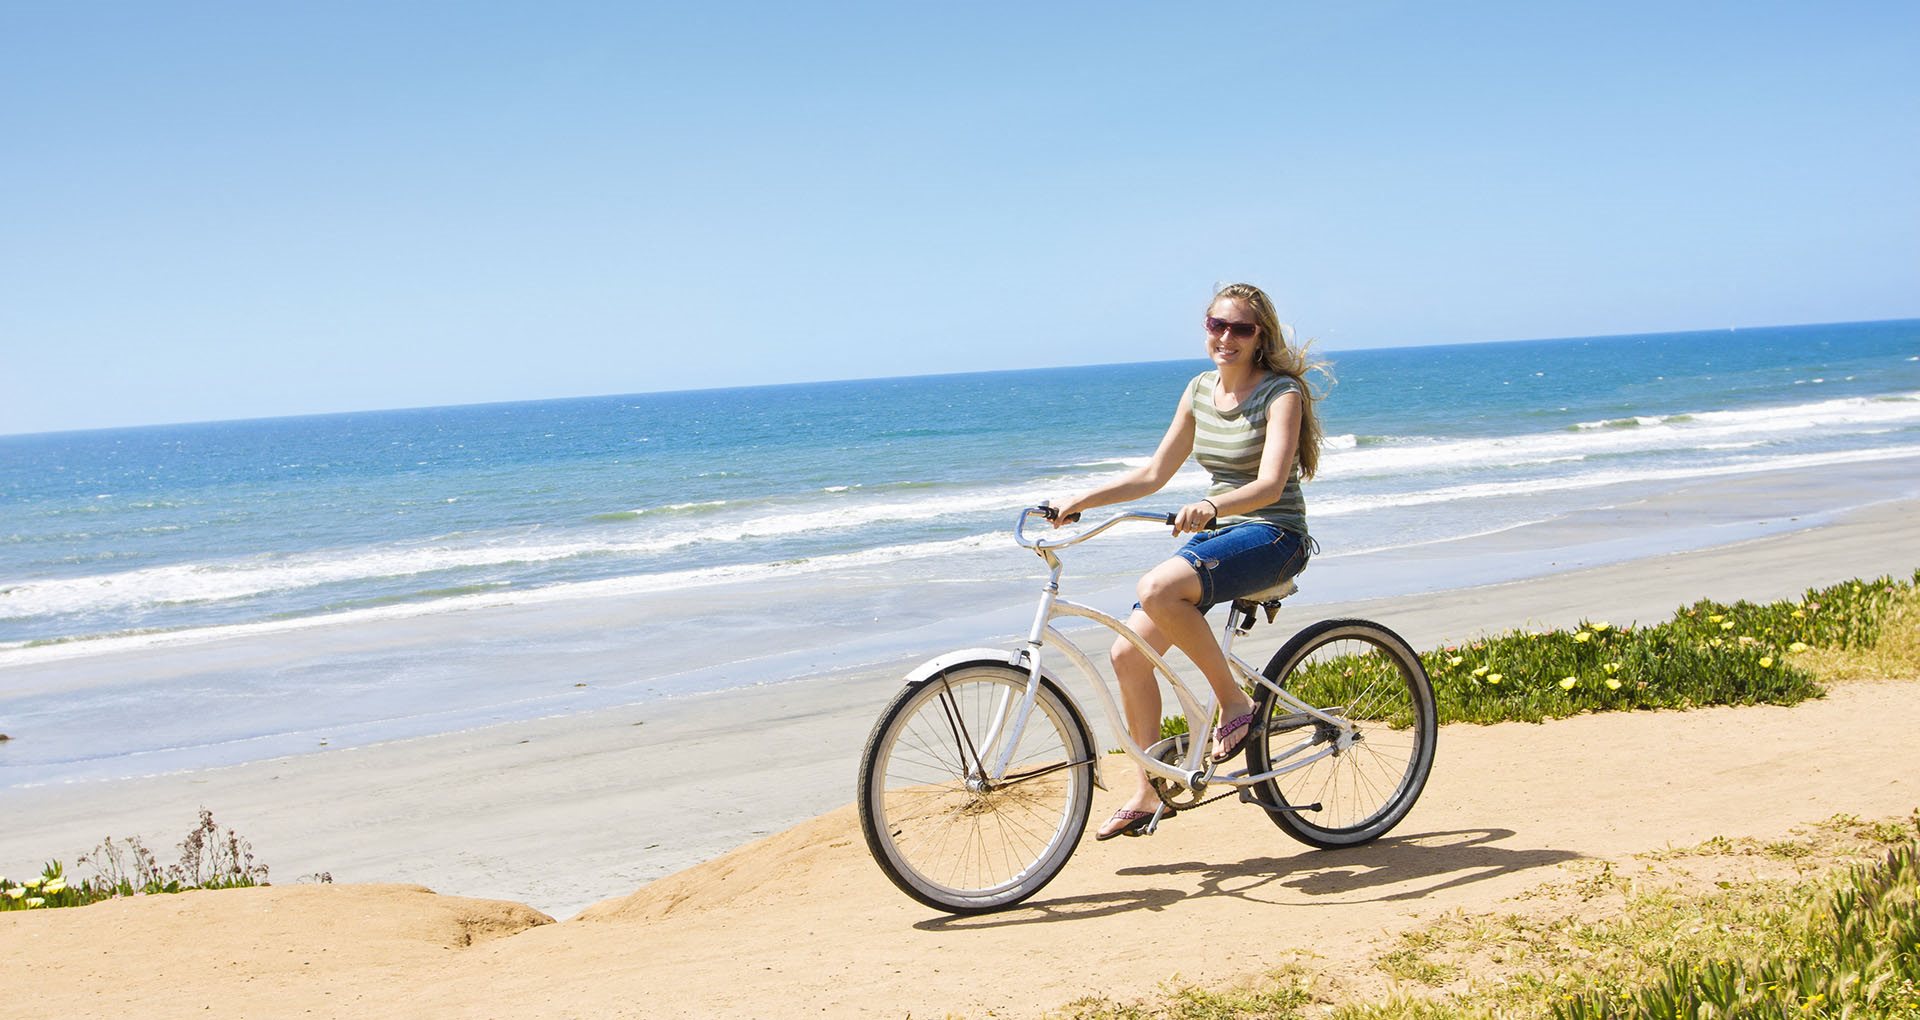 Girl on bike by beach Pointe at 2316 Apts  for rent in Oceanside CA